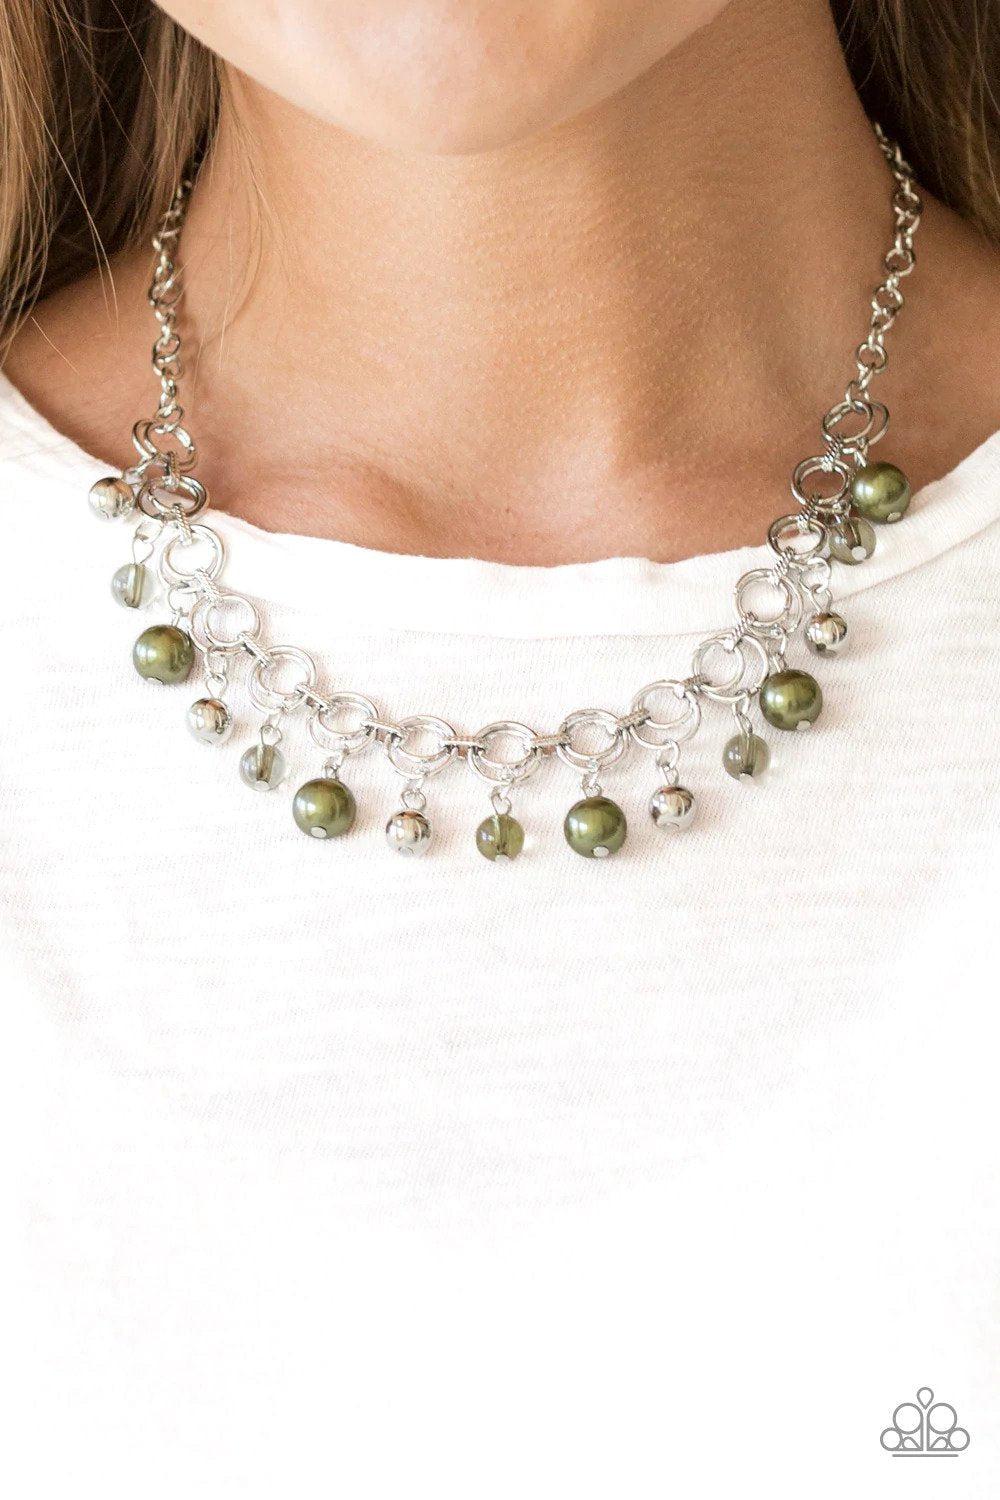 Fiercely Fancy Green Necklace - Paparazzi Accessories- lightbox - CarasShop.com - $5 Jewelry by Cara Jewels